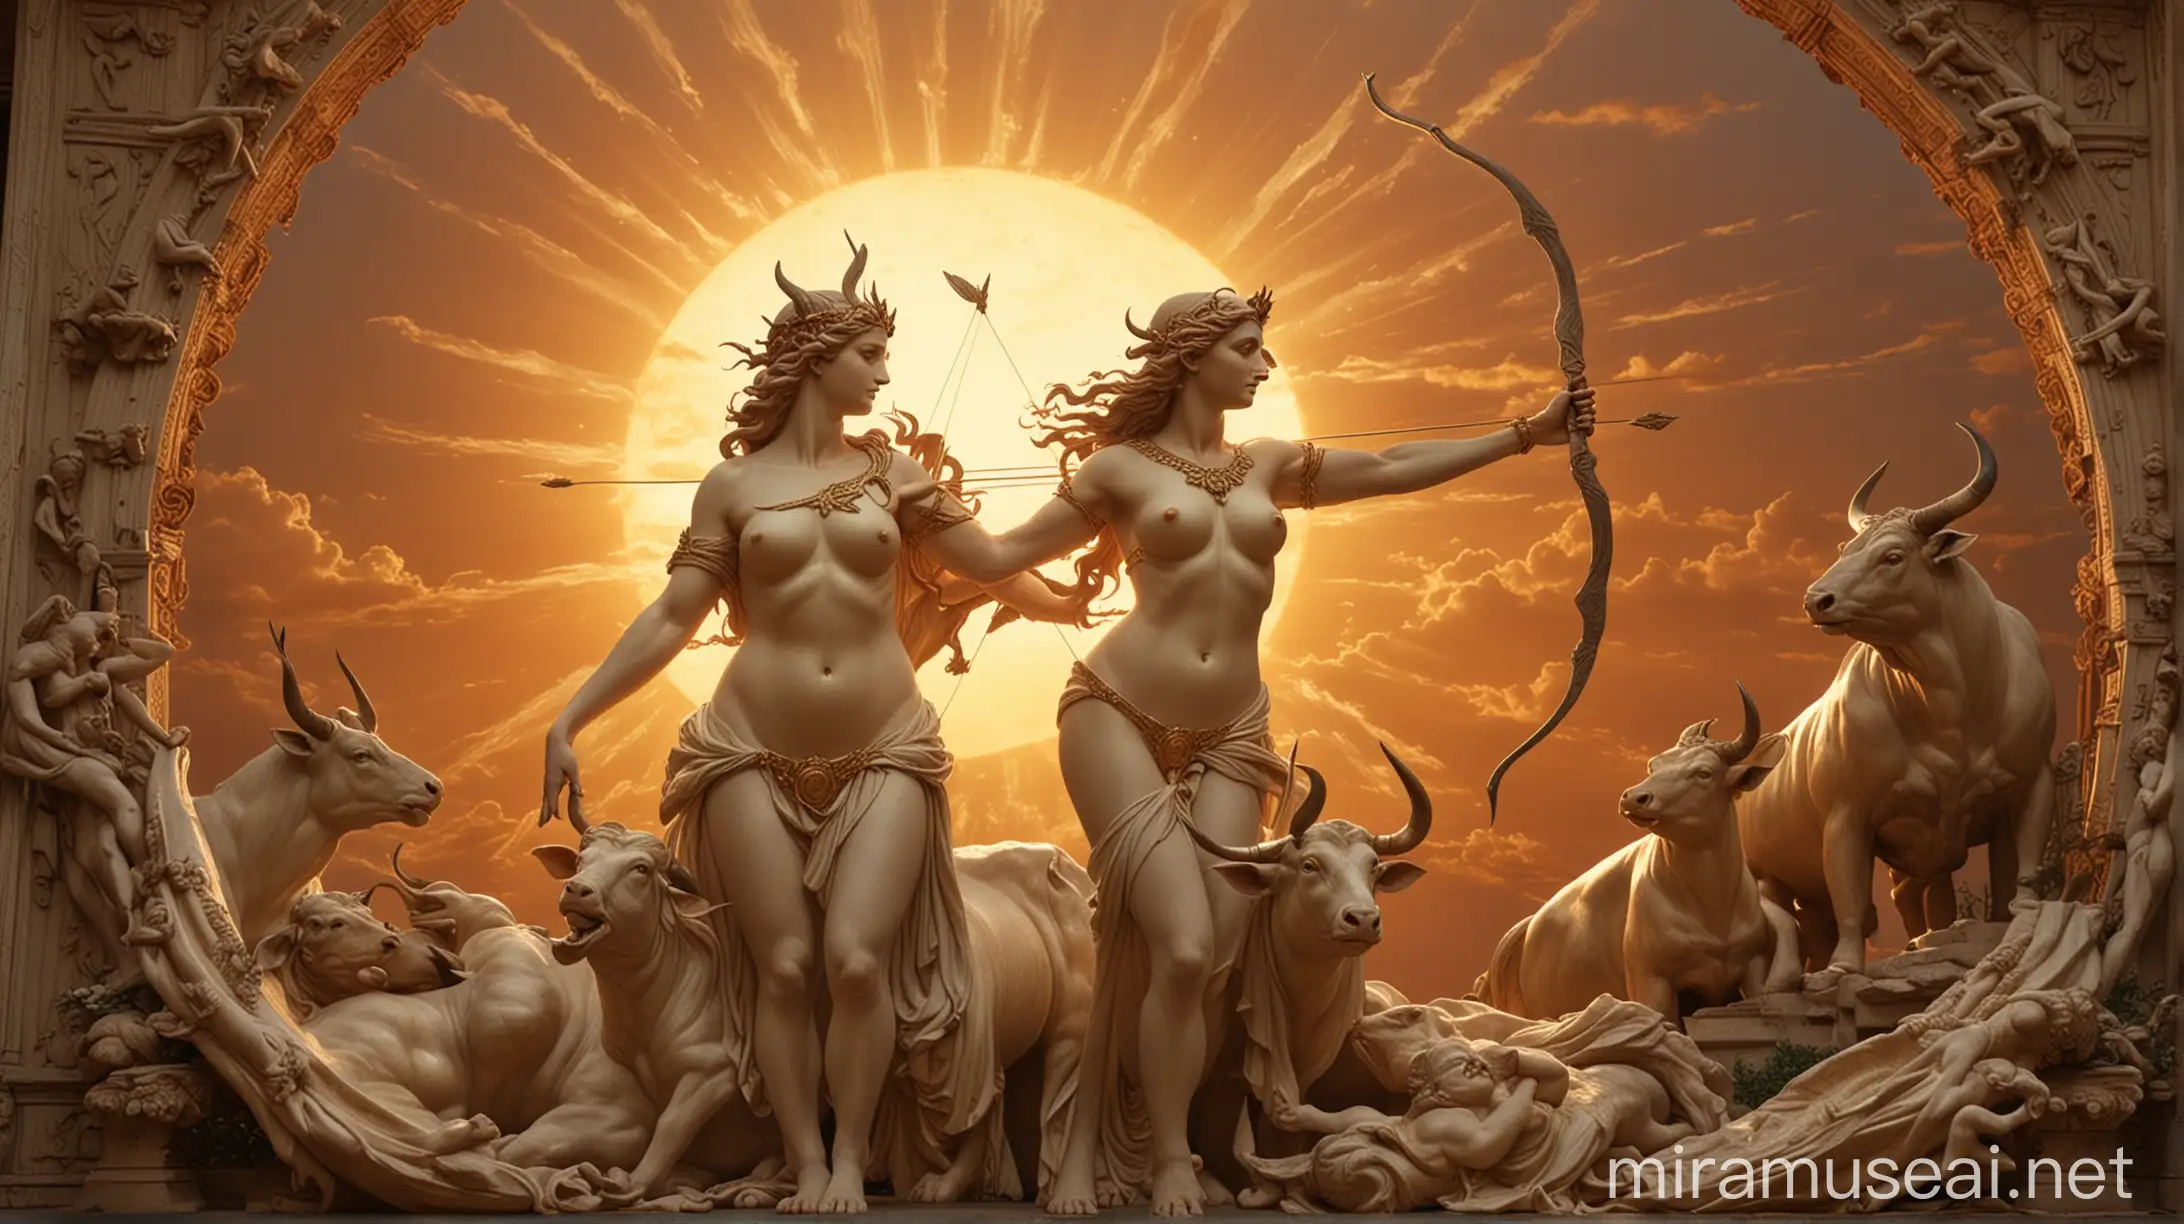 A huge bull in the center with the radiant Sun behind him. On the left side of the Sun, the goddess Aphrodite, sensualizing with her curves and full breasts and with a melancholic expression. To the right side of the Sun, the goddess Artemis with a wrathful expression, bow and arrows. The setting is enriched by antique-style details and golden tones.n